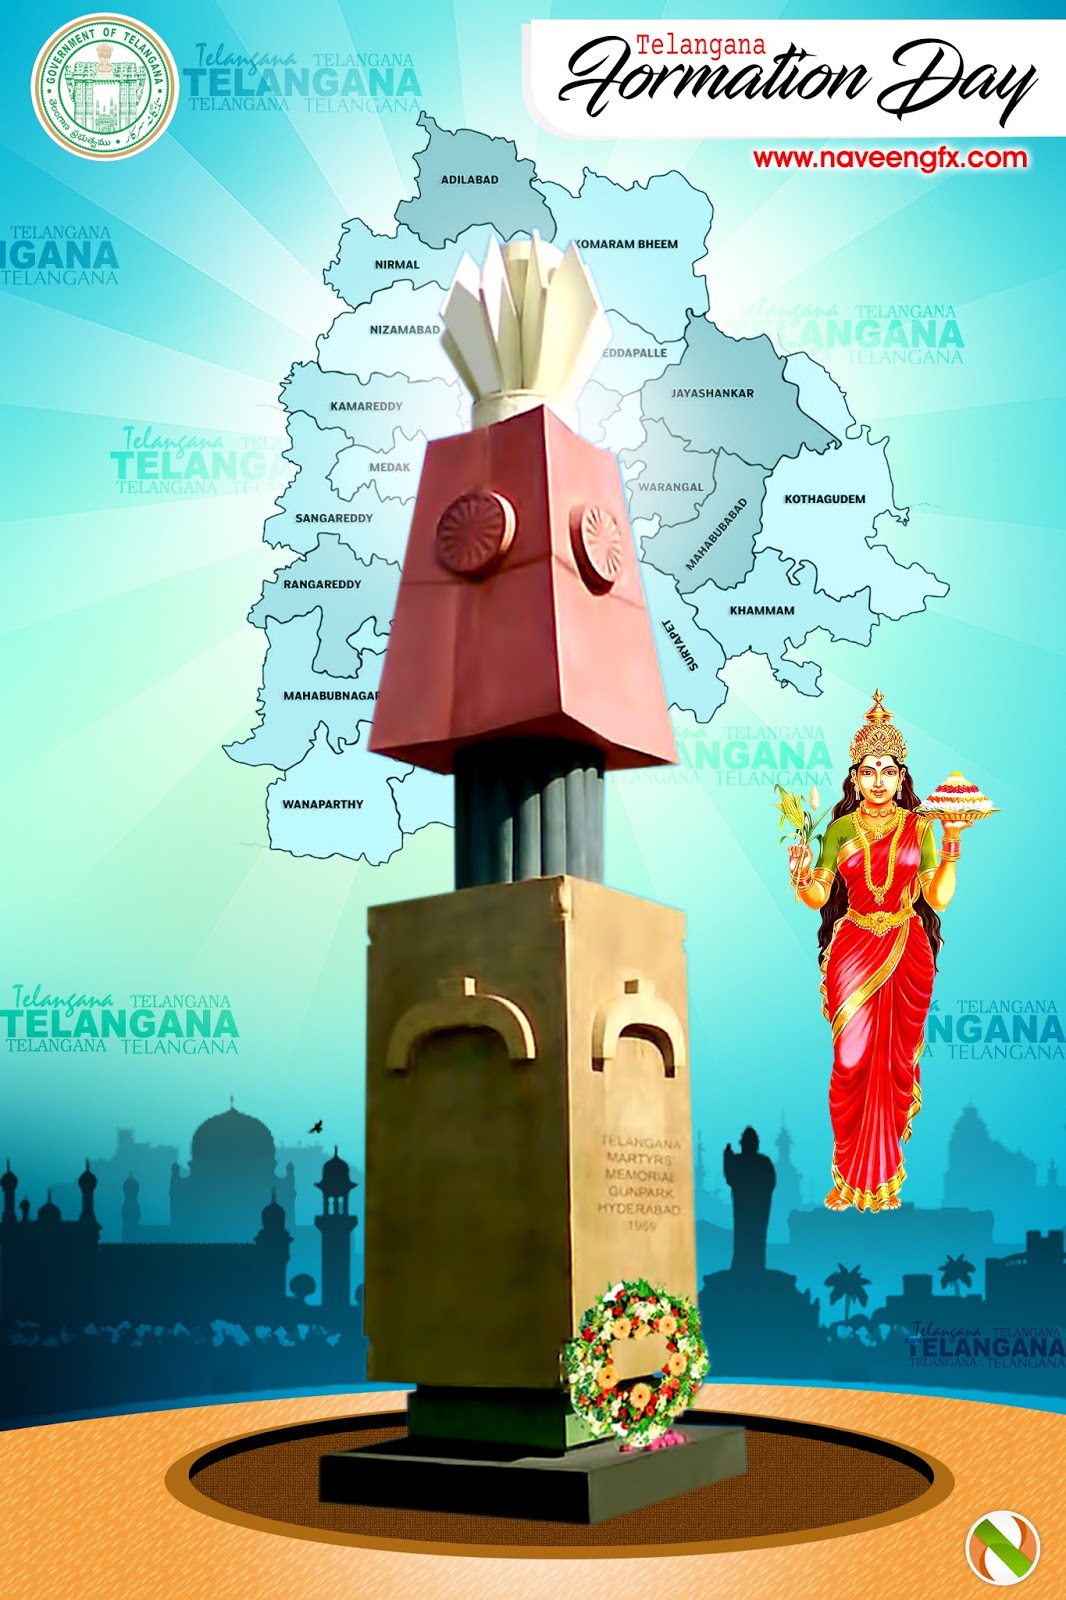 telangana formation day wishes quotes and posters for telangana people |  naveengfx